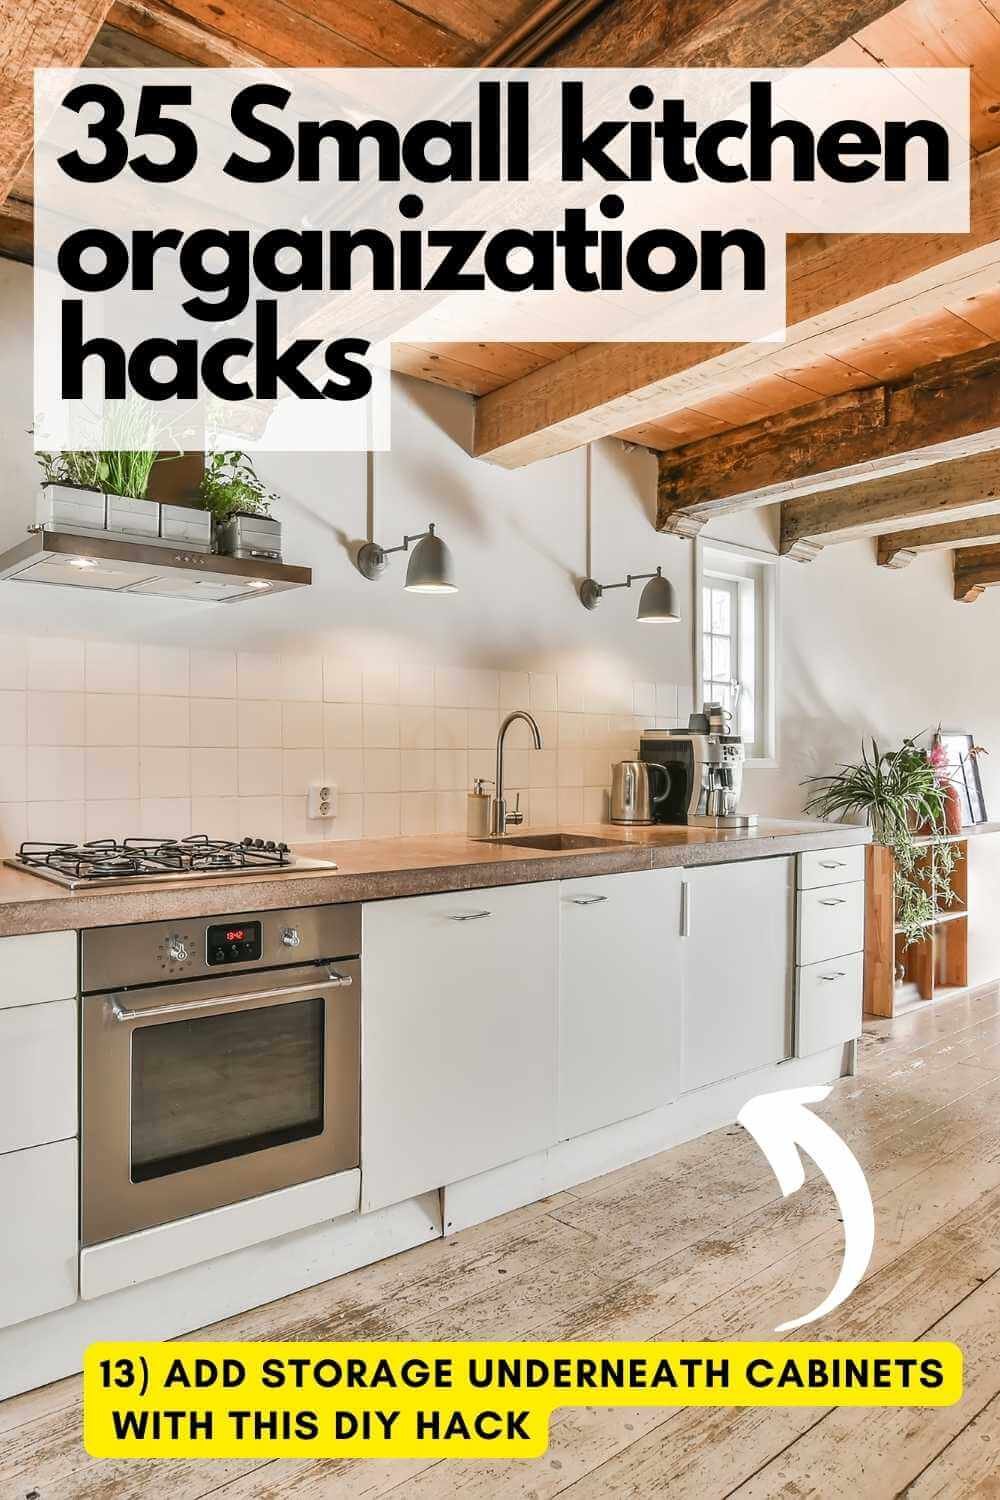 The Extension Hack That Adds Serious Countertop Space To Your Small Kitchen